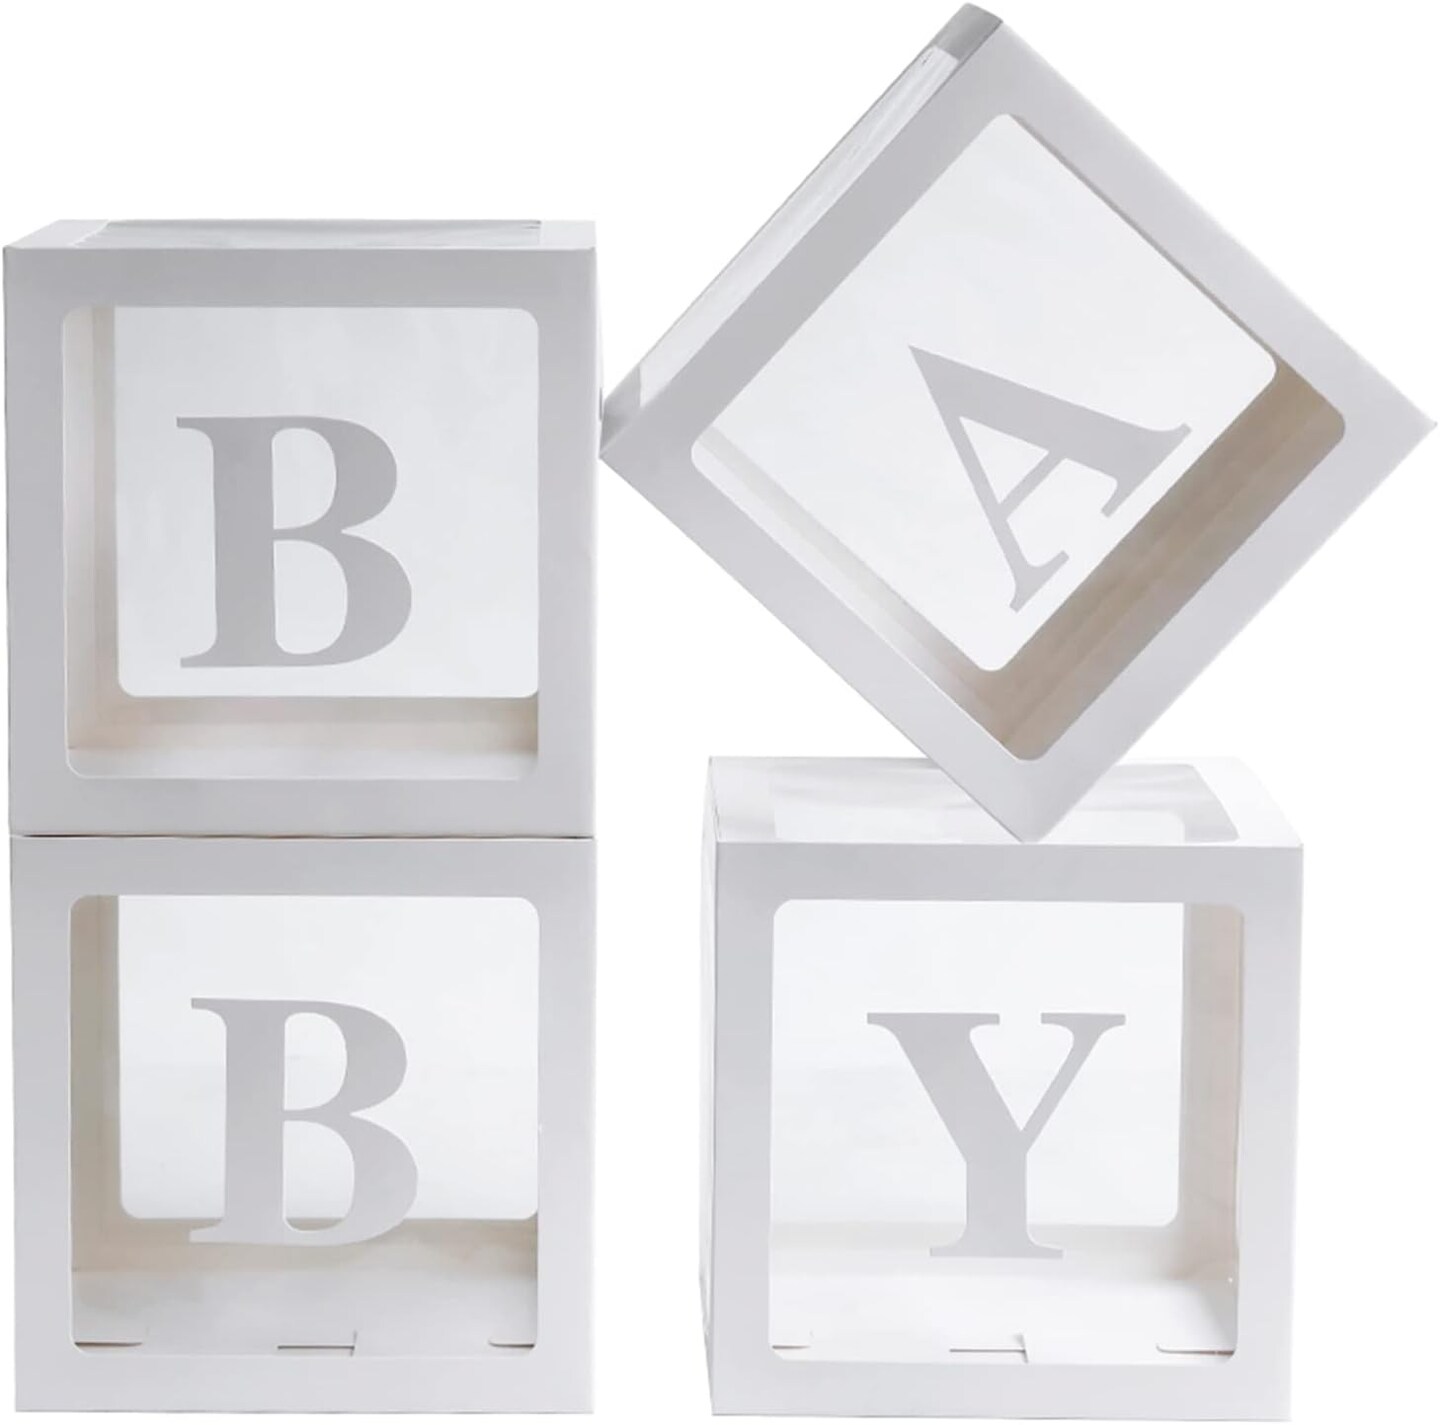 Baby Boxes with Letters for Baby Shower,4 Pcs Clear Balloon boxes with16 Letters Transparent Baby Shower Decorations Block Boxes for Birthday,Gender Reveal,Wedding&#xFF0C;Reusable Favors In Gift box